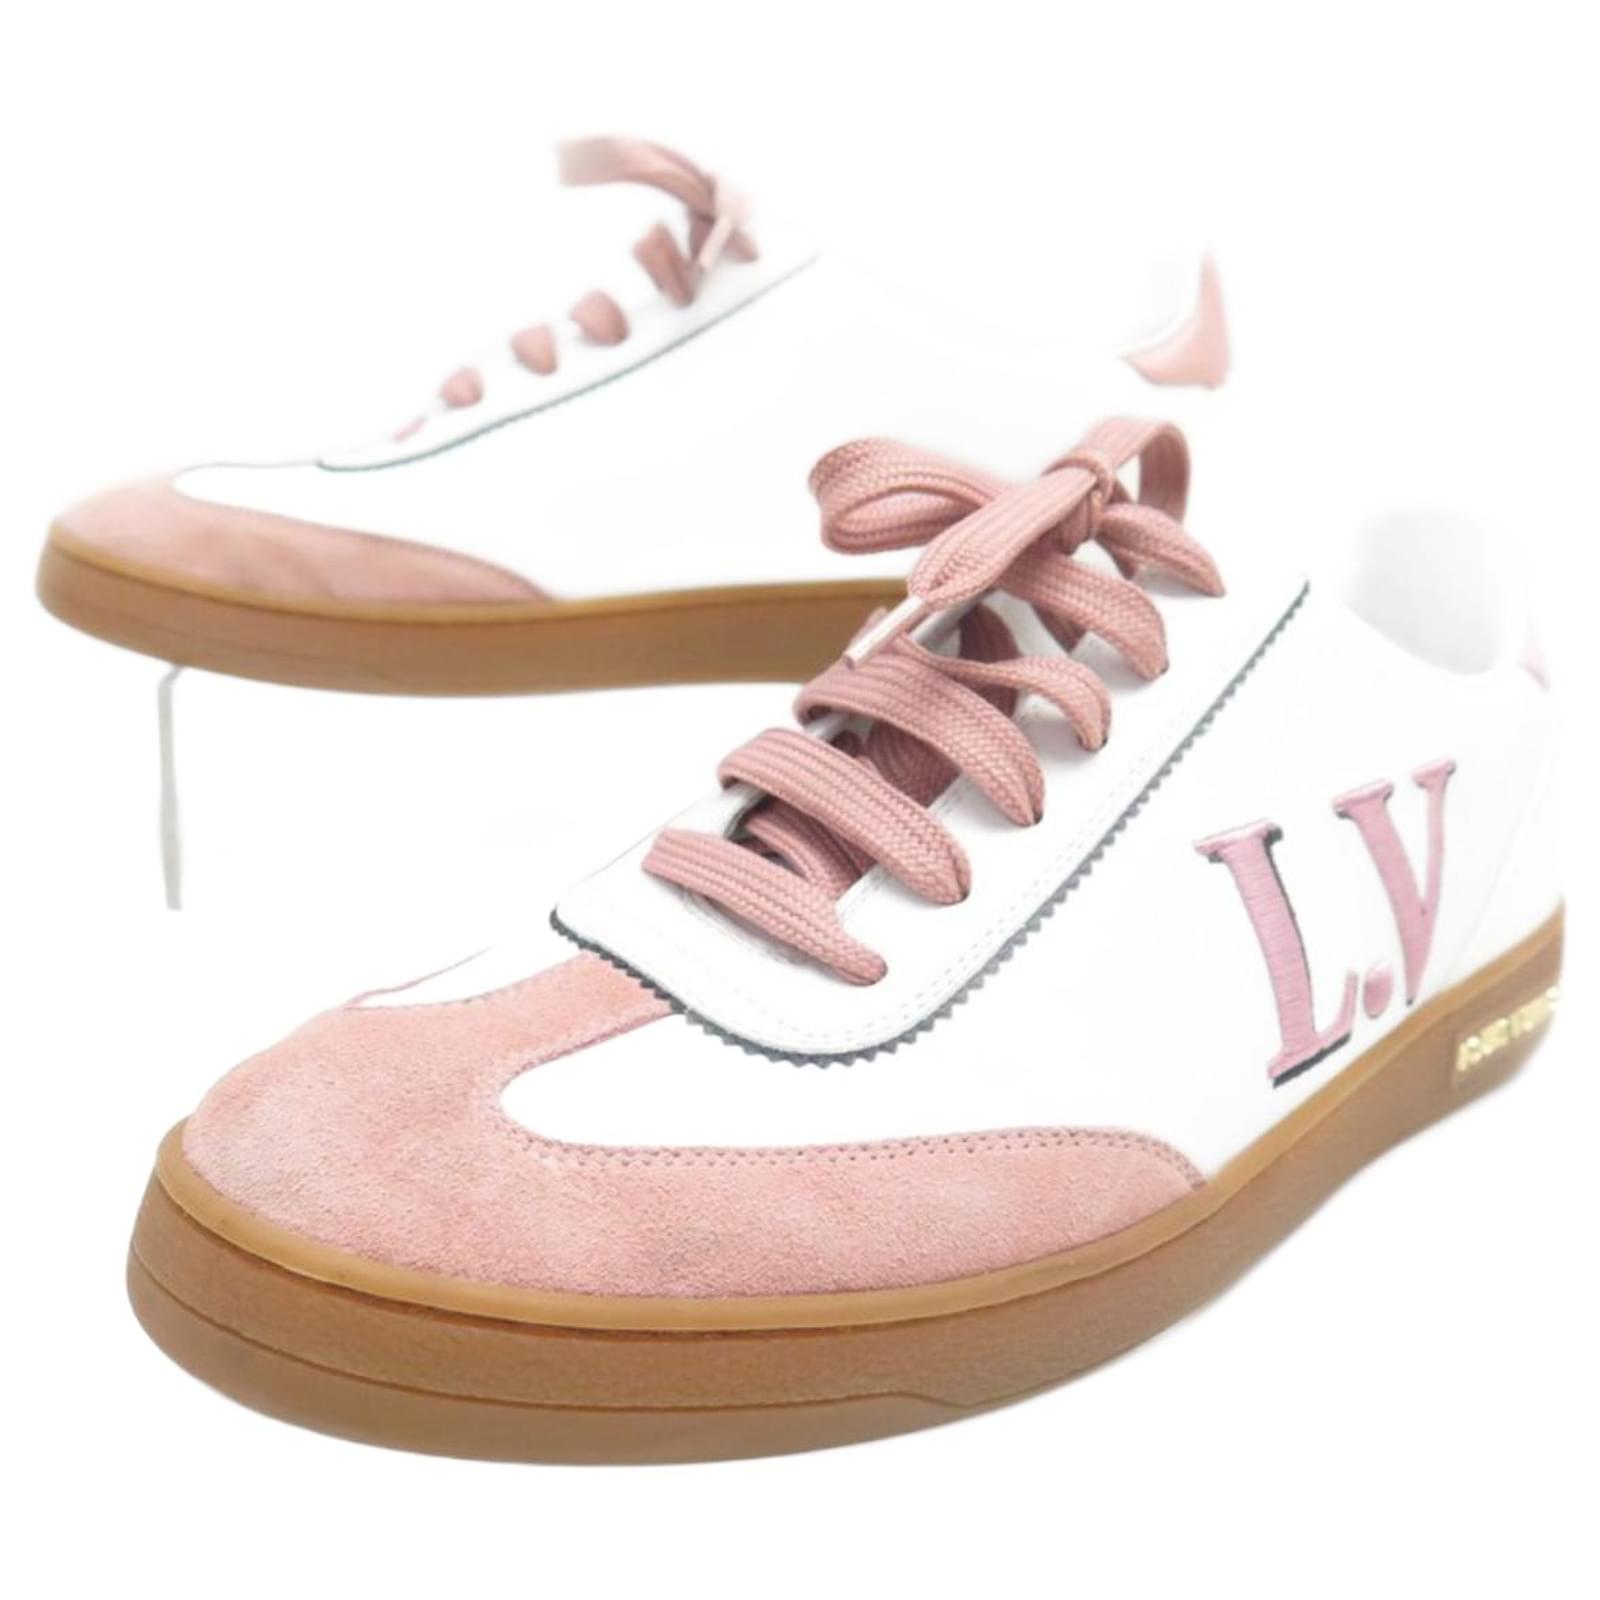 louis vuitton pink and white sneakers